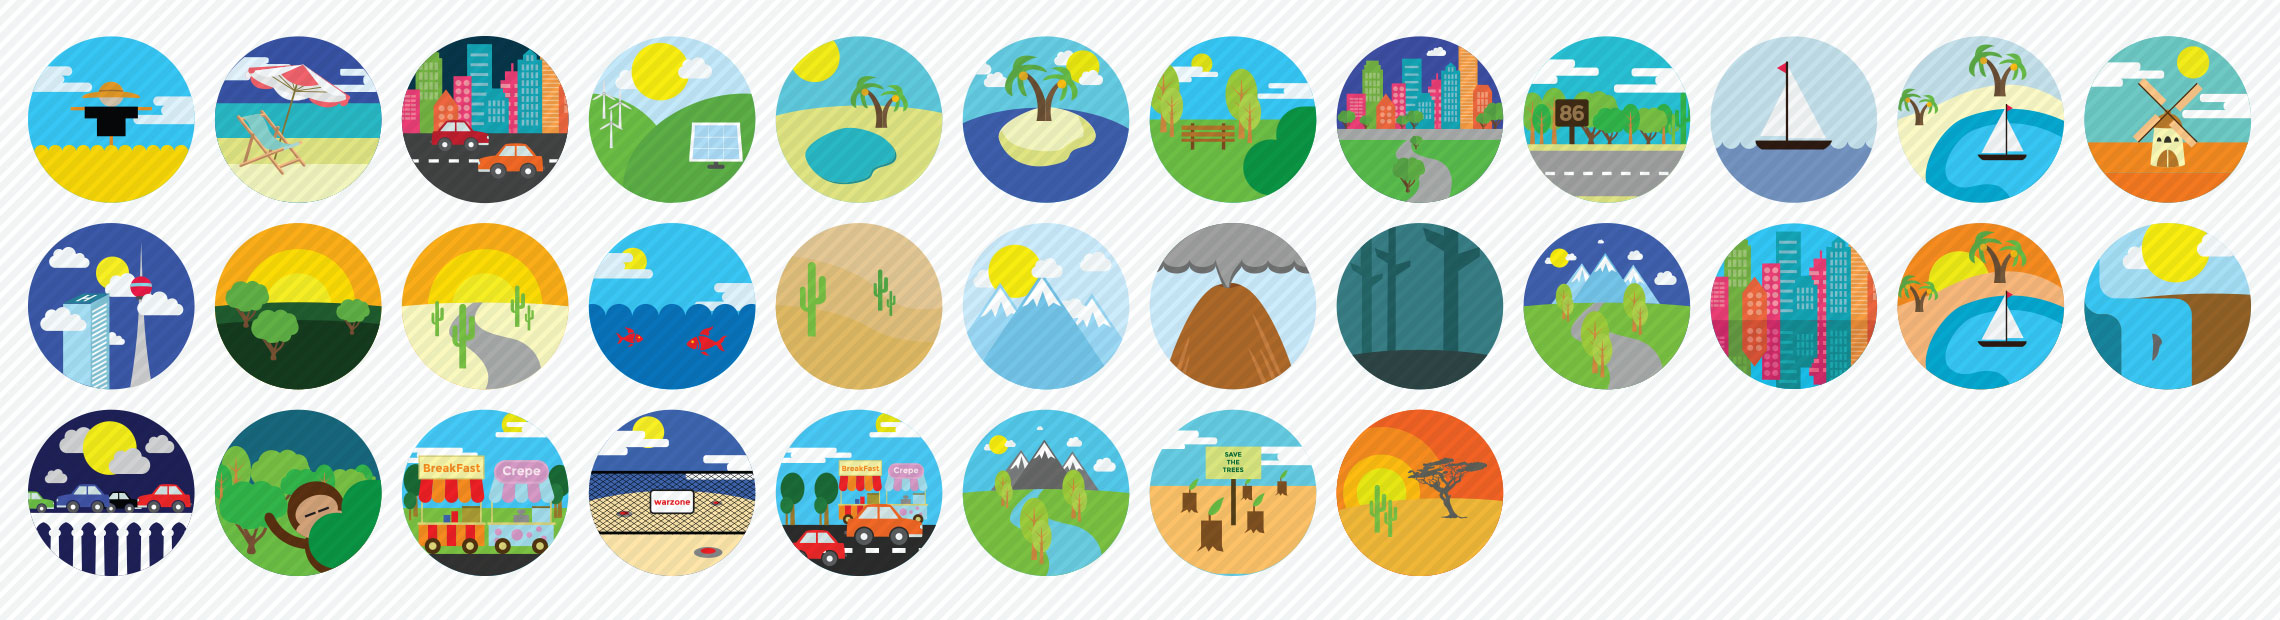 Places-and-Locations-Flat-Icons